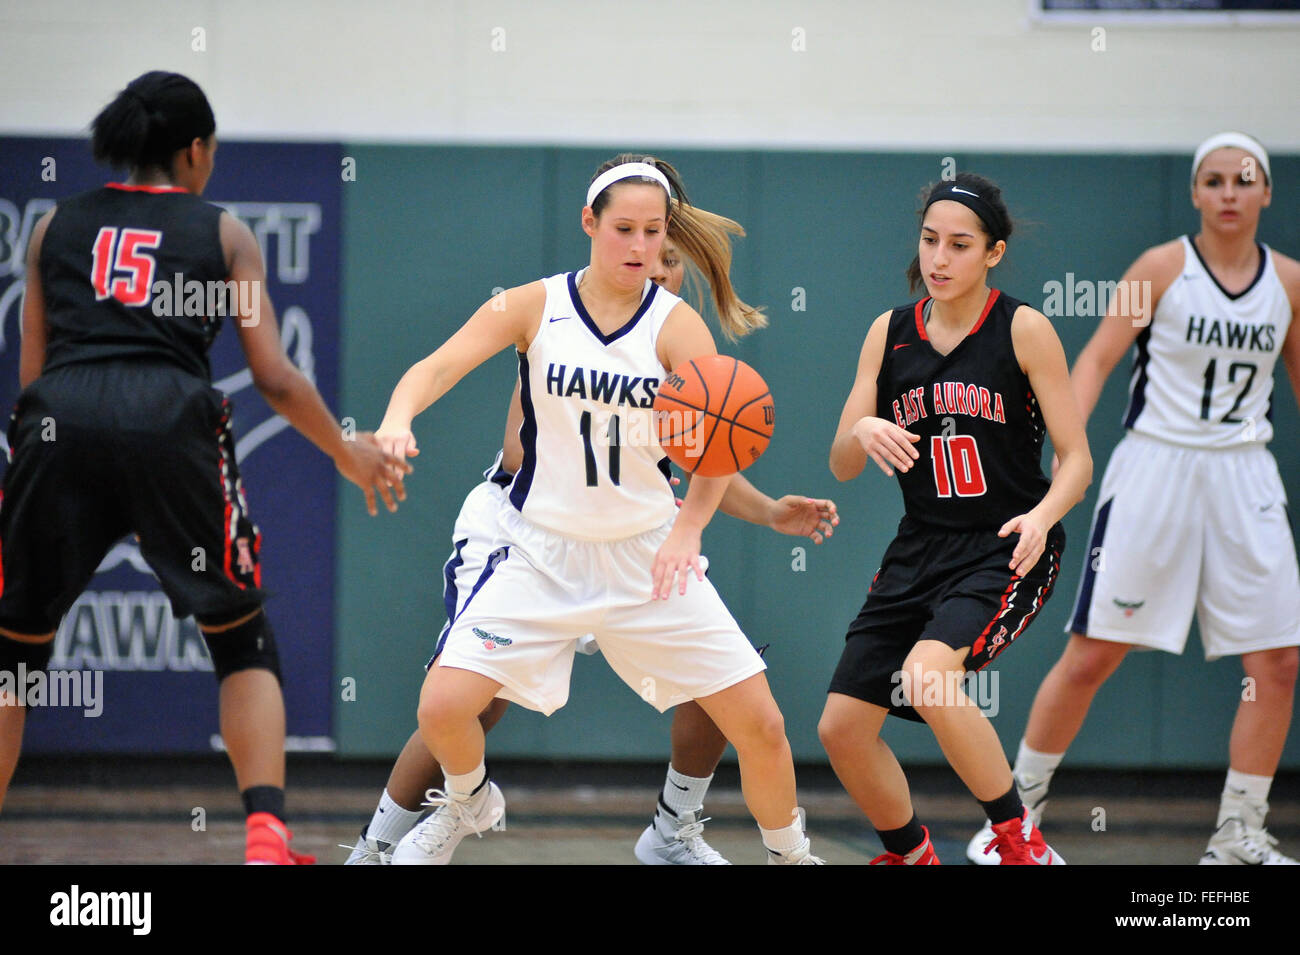 While defending her basket a high school player is totally focused on the ball after creating a turnover. USA. Stock Photo